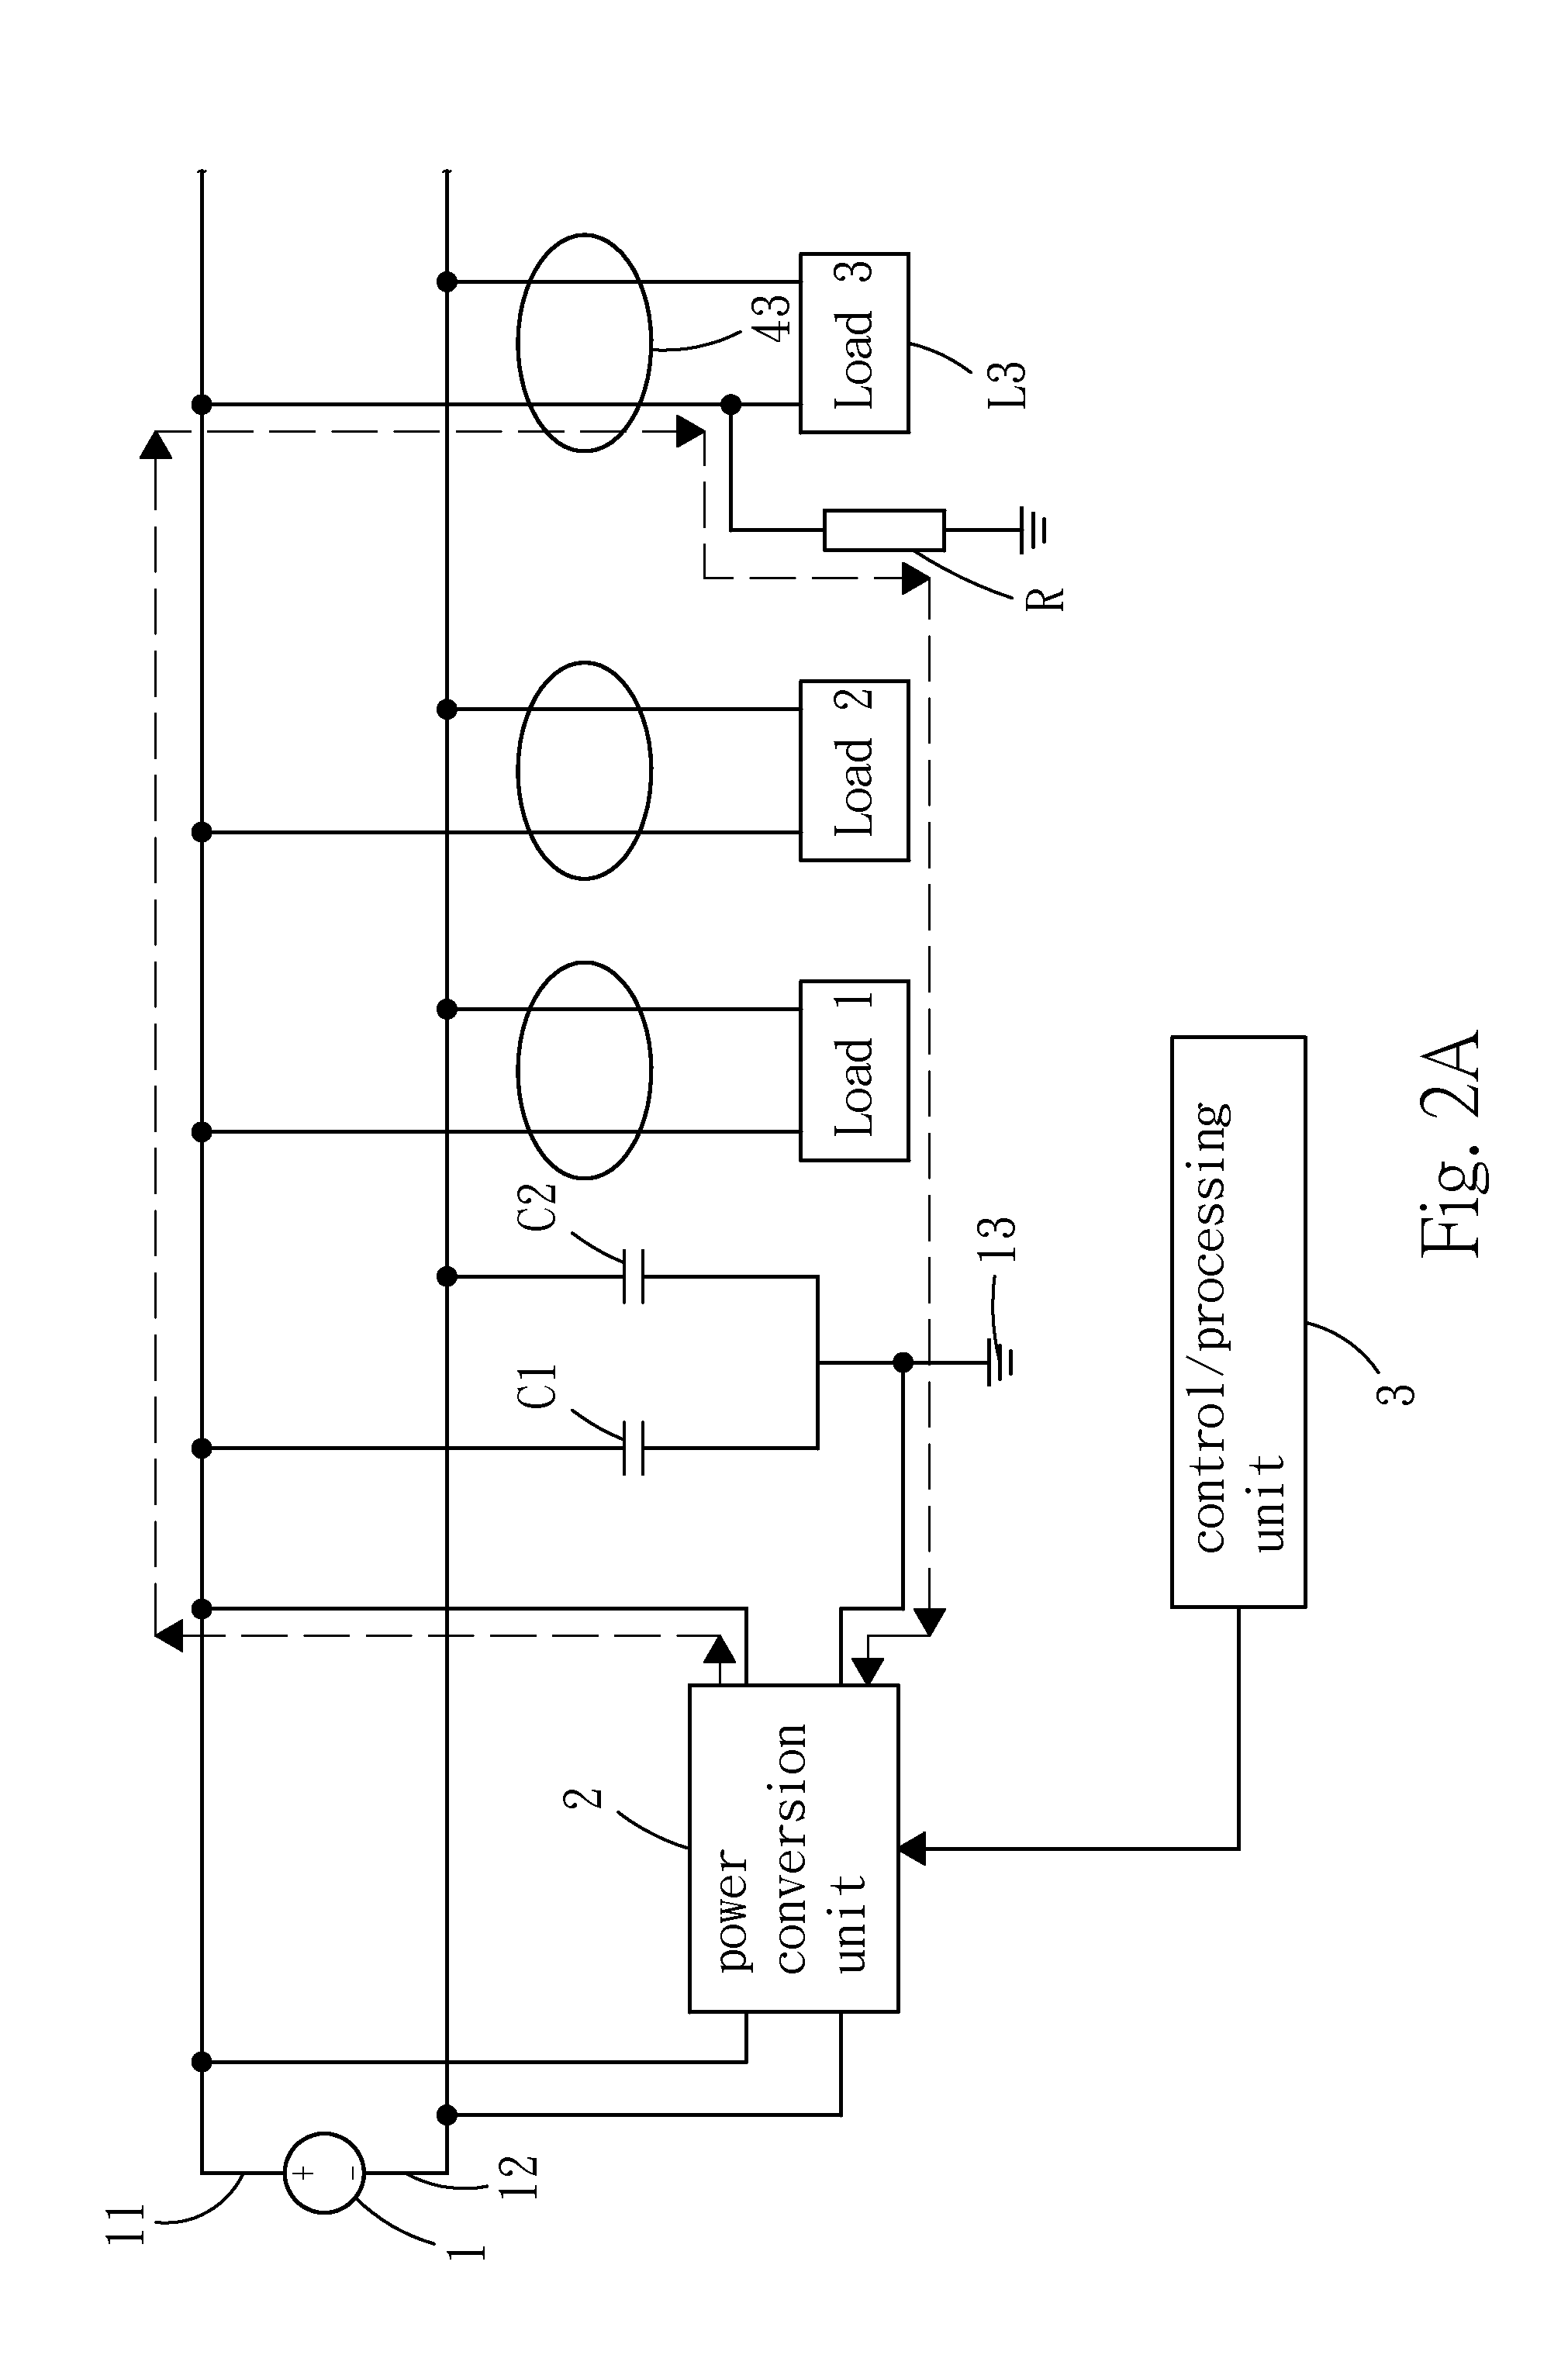 High-sensitivity insulation resistance detection method and circuit for ungrounded DC power supply system